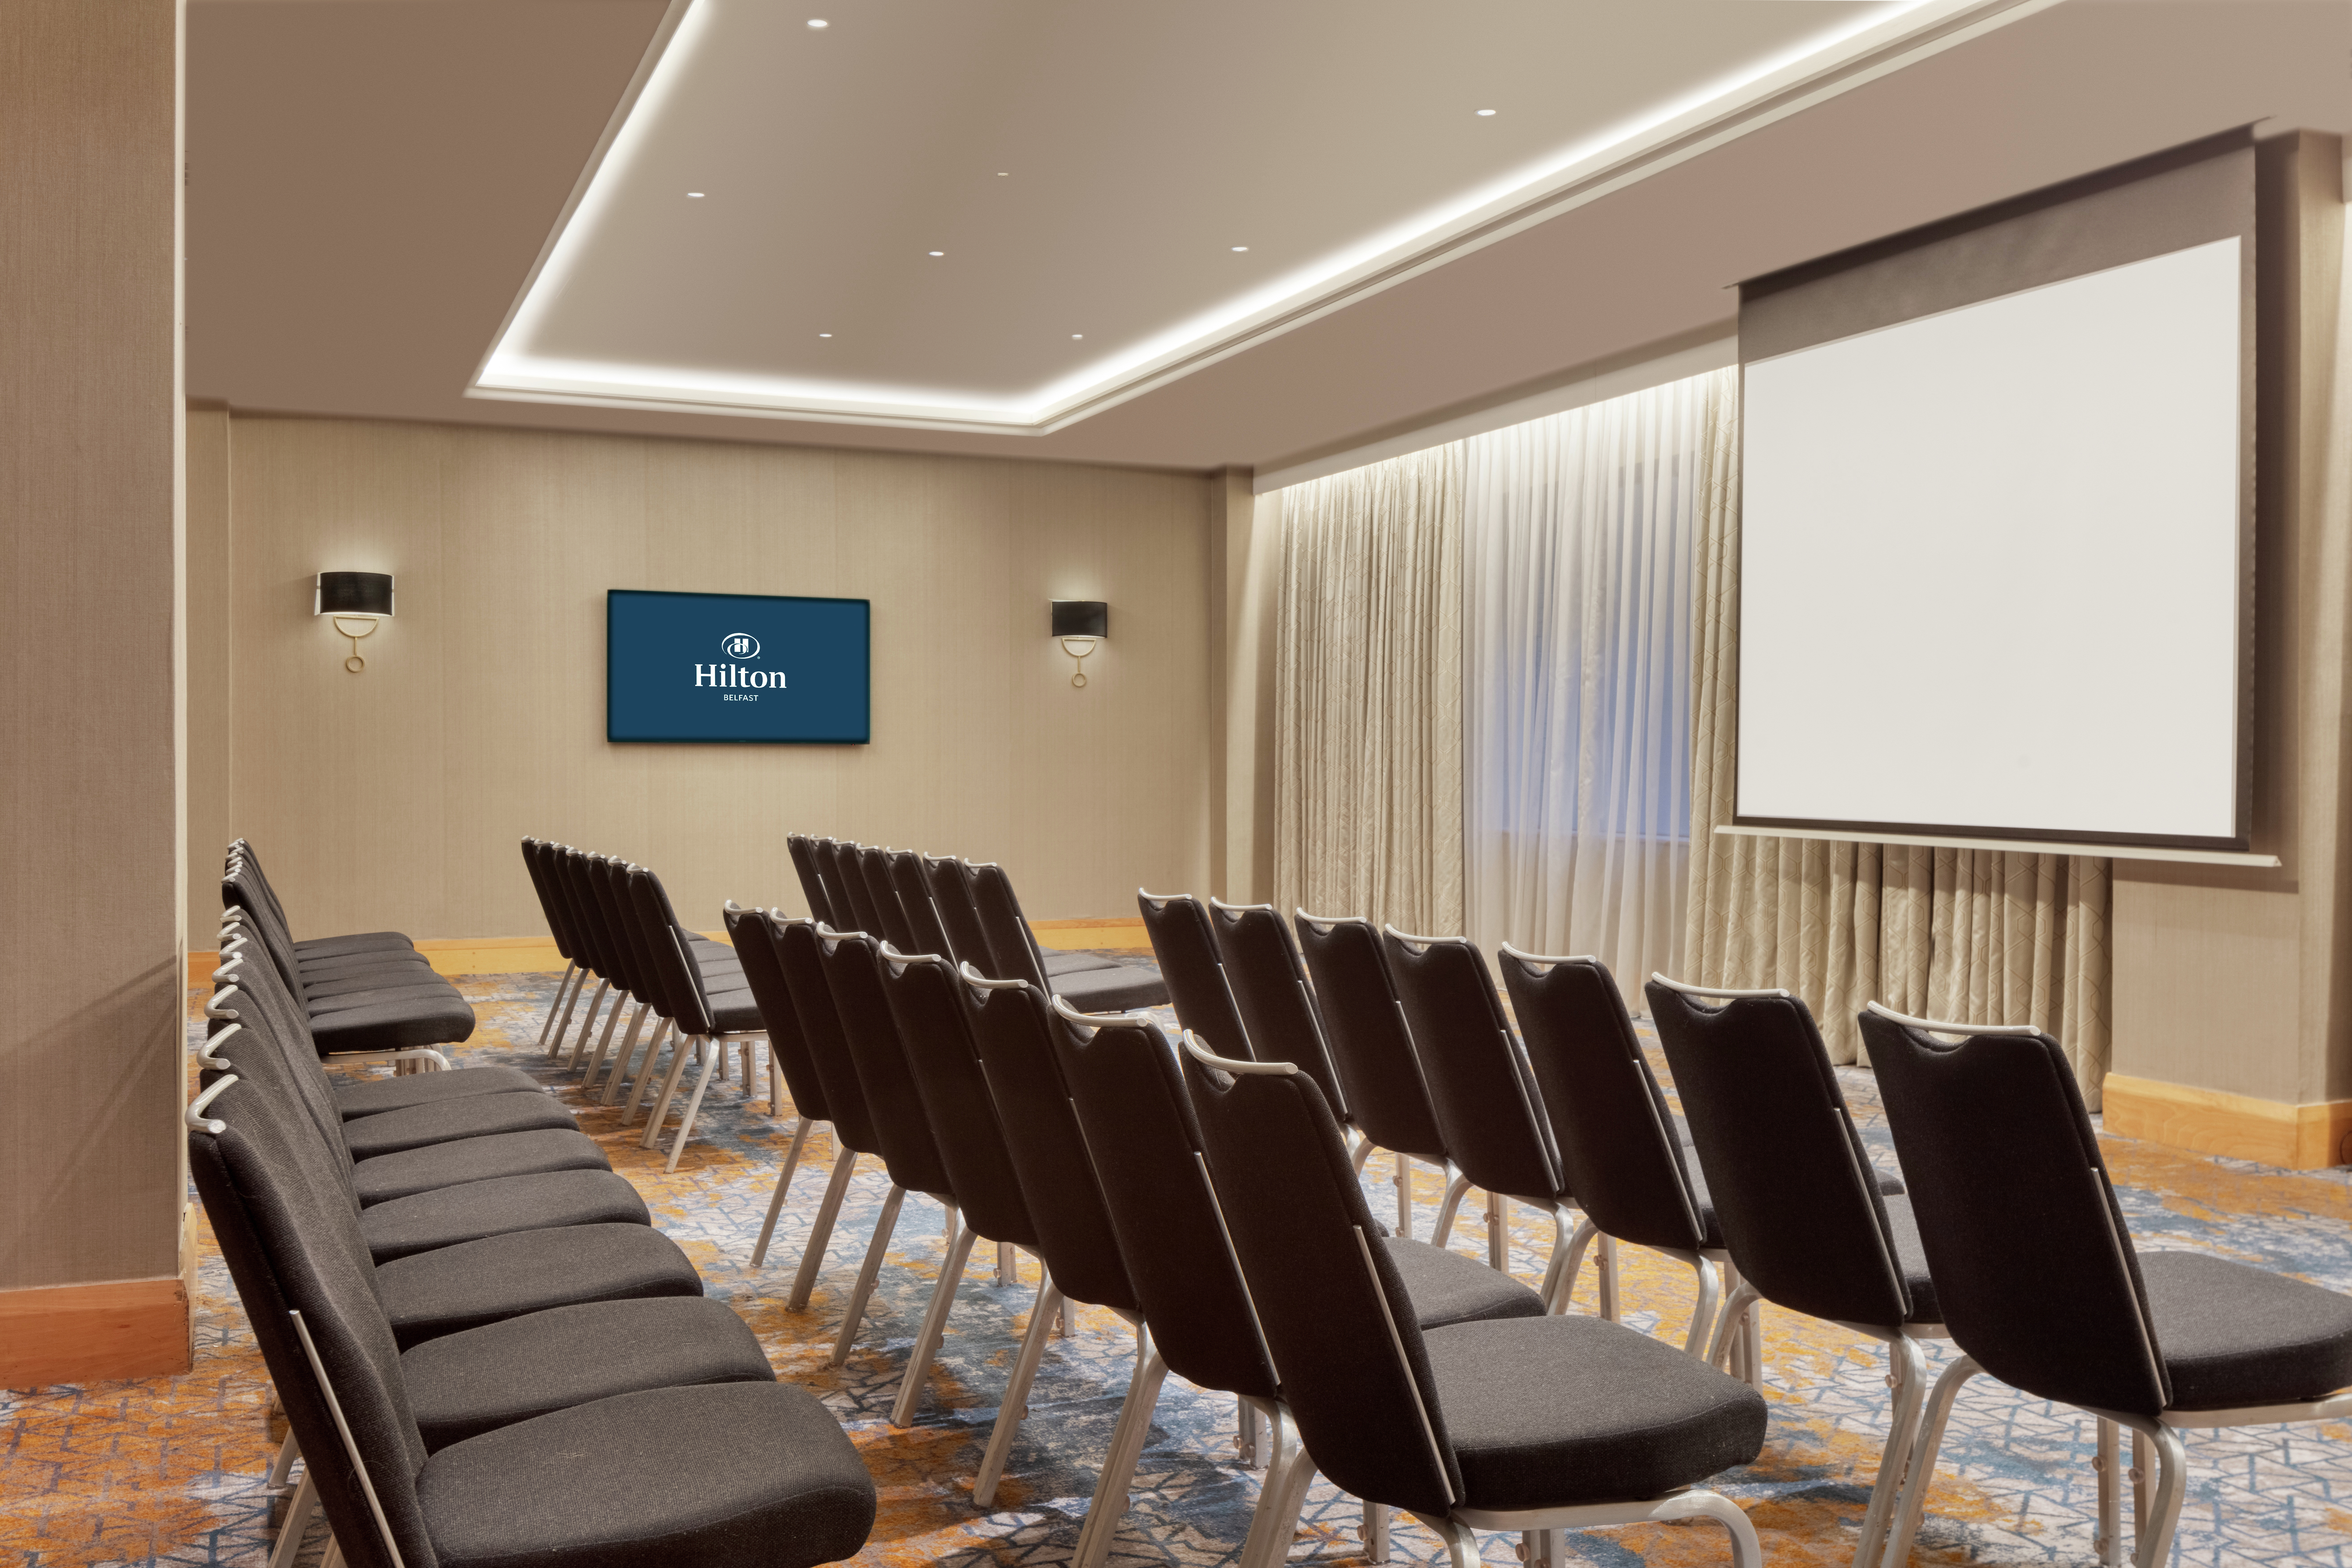 Theater Style Setup Meeting Room with Projection Screen and HDTV